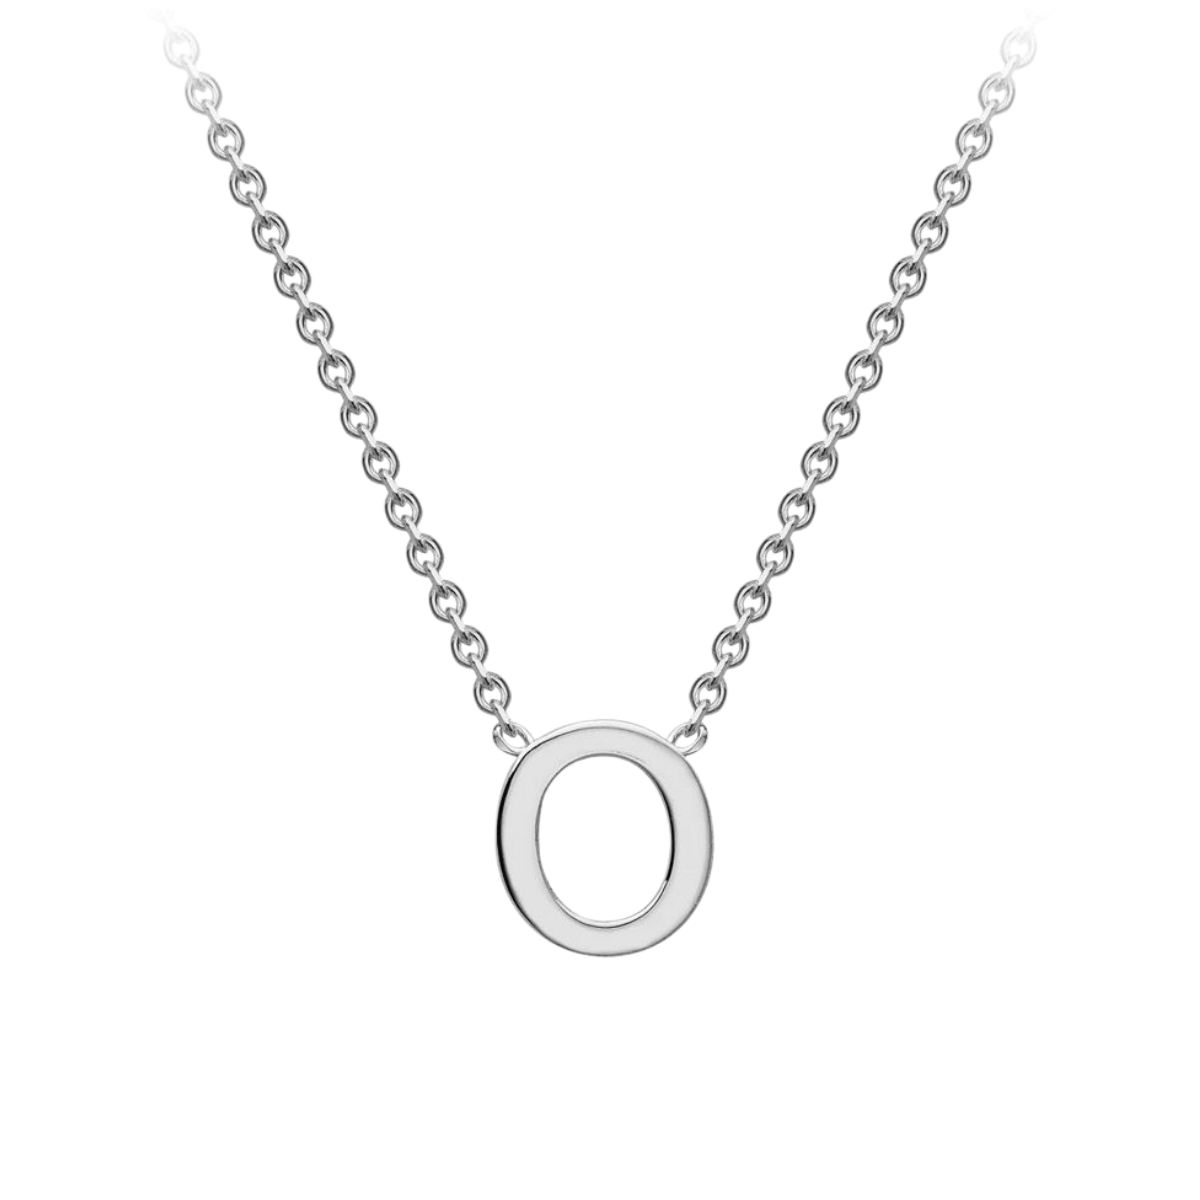 PETITE 'O' INITIAL NECKLACE | 9K SOLID WHITE GOLD